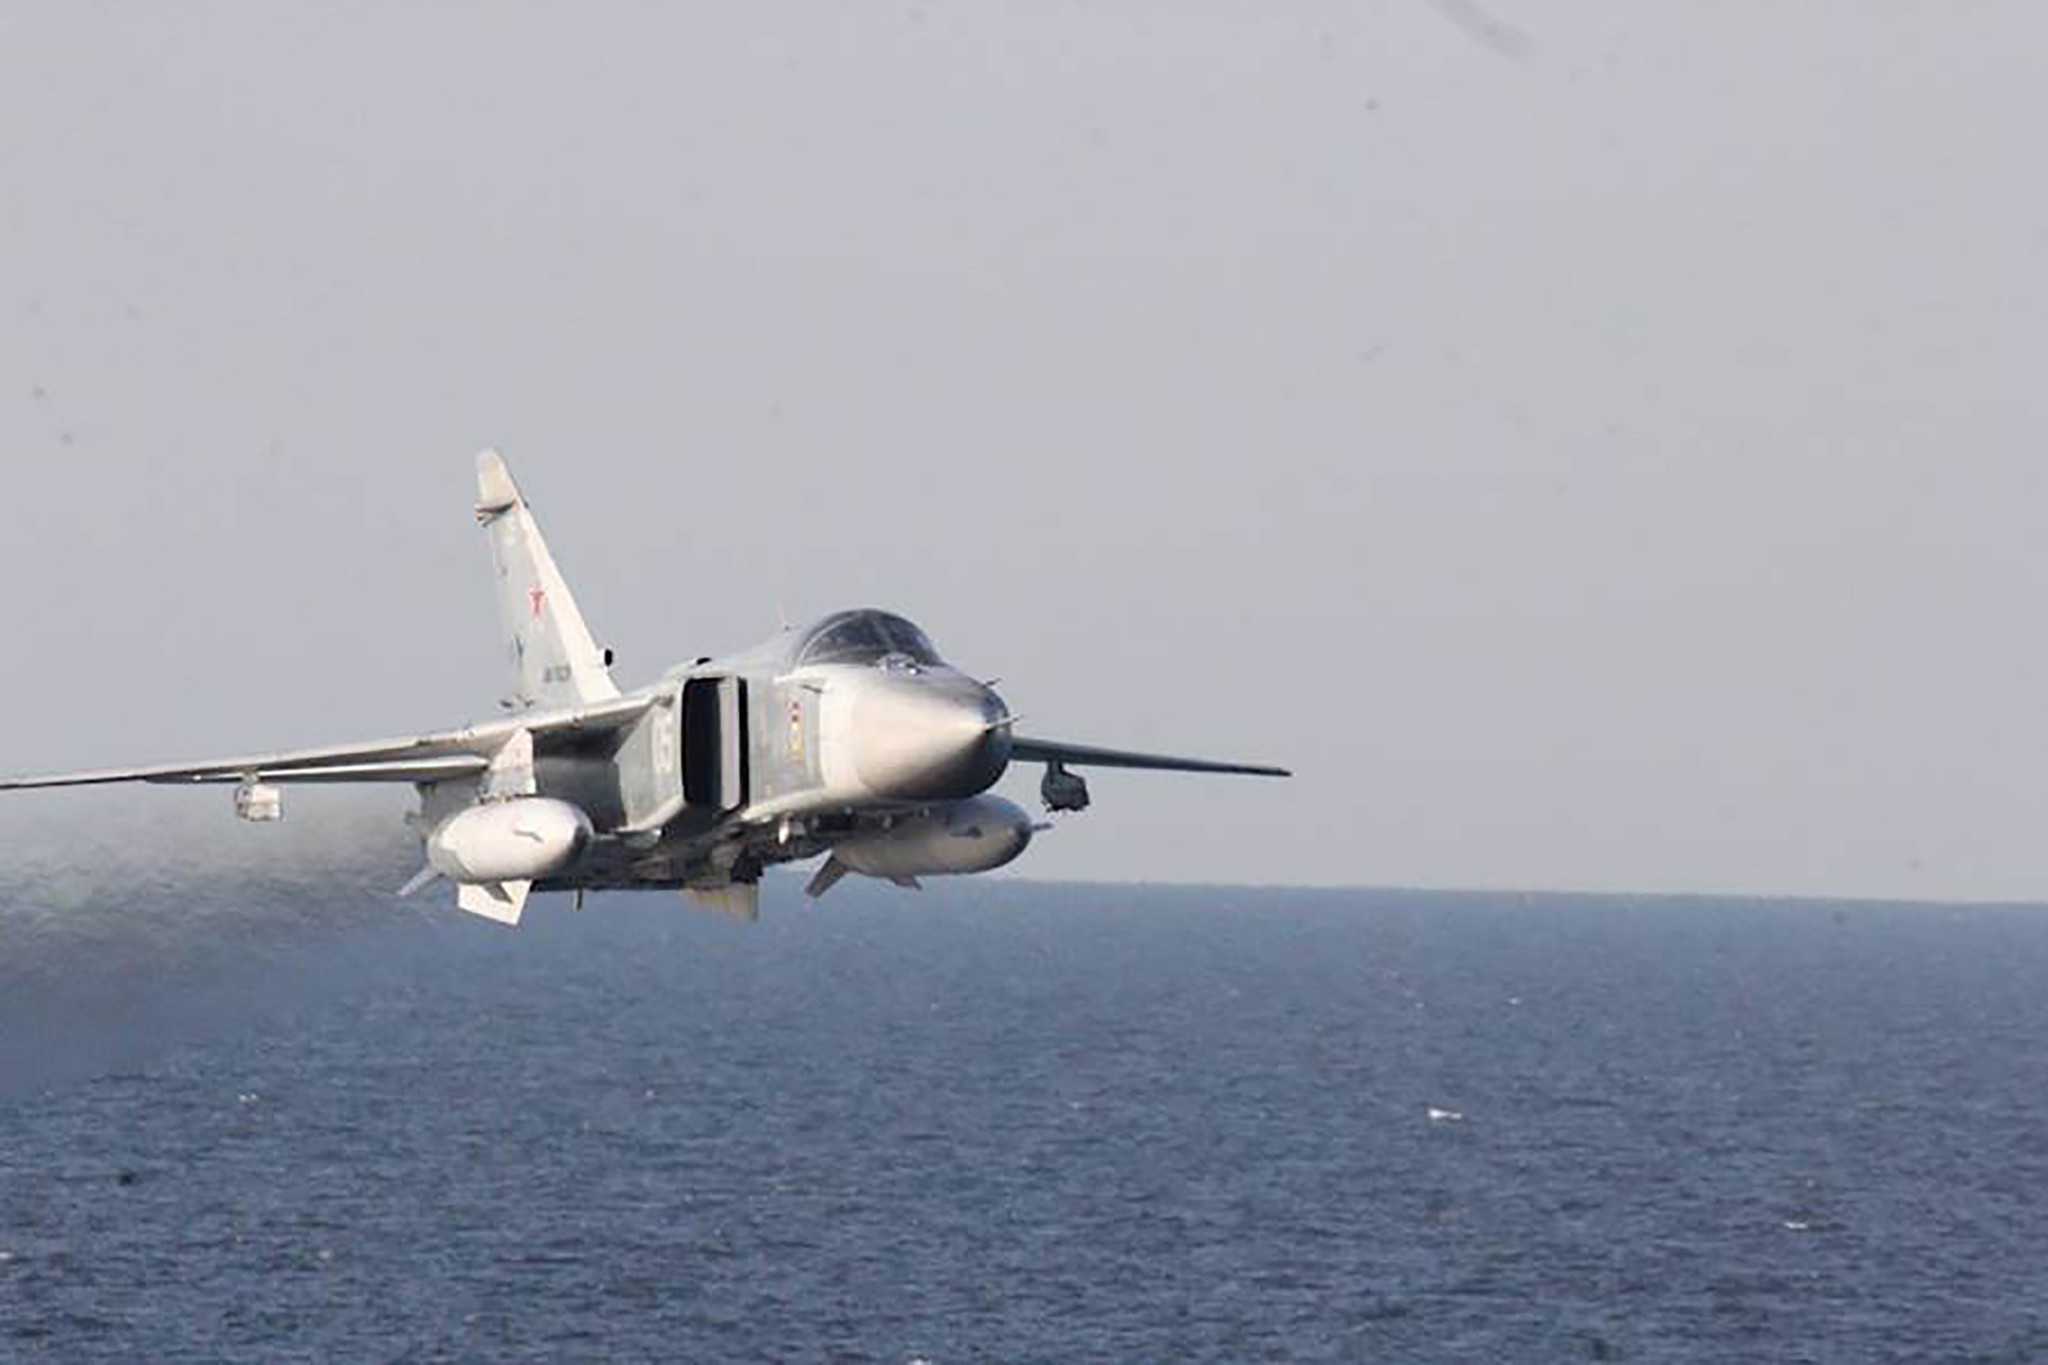 Russian fighter jet flies within 10 feet of Navy aircraft - Chicago ...